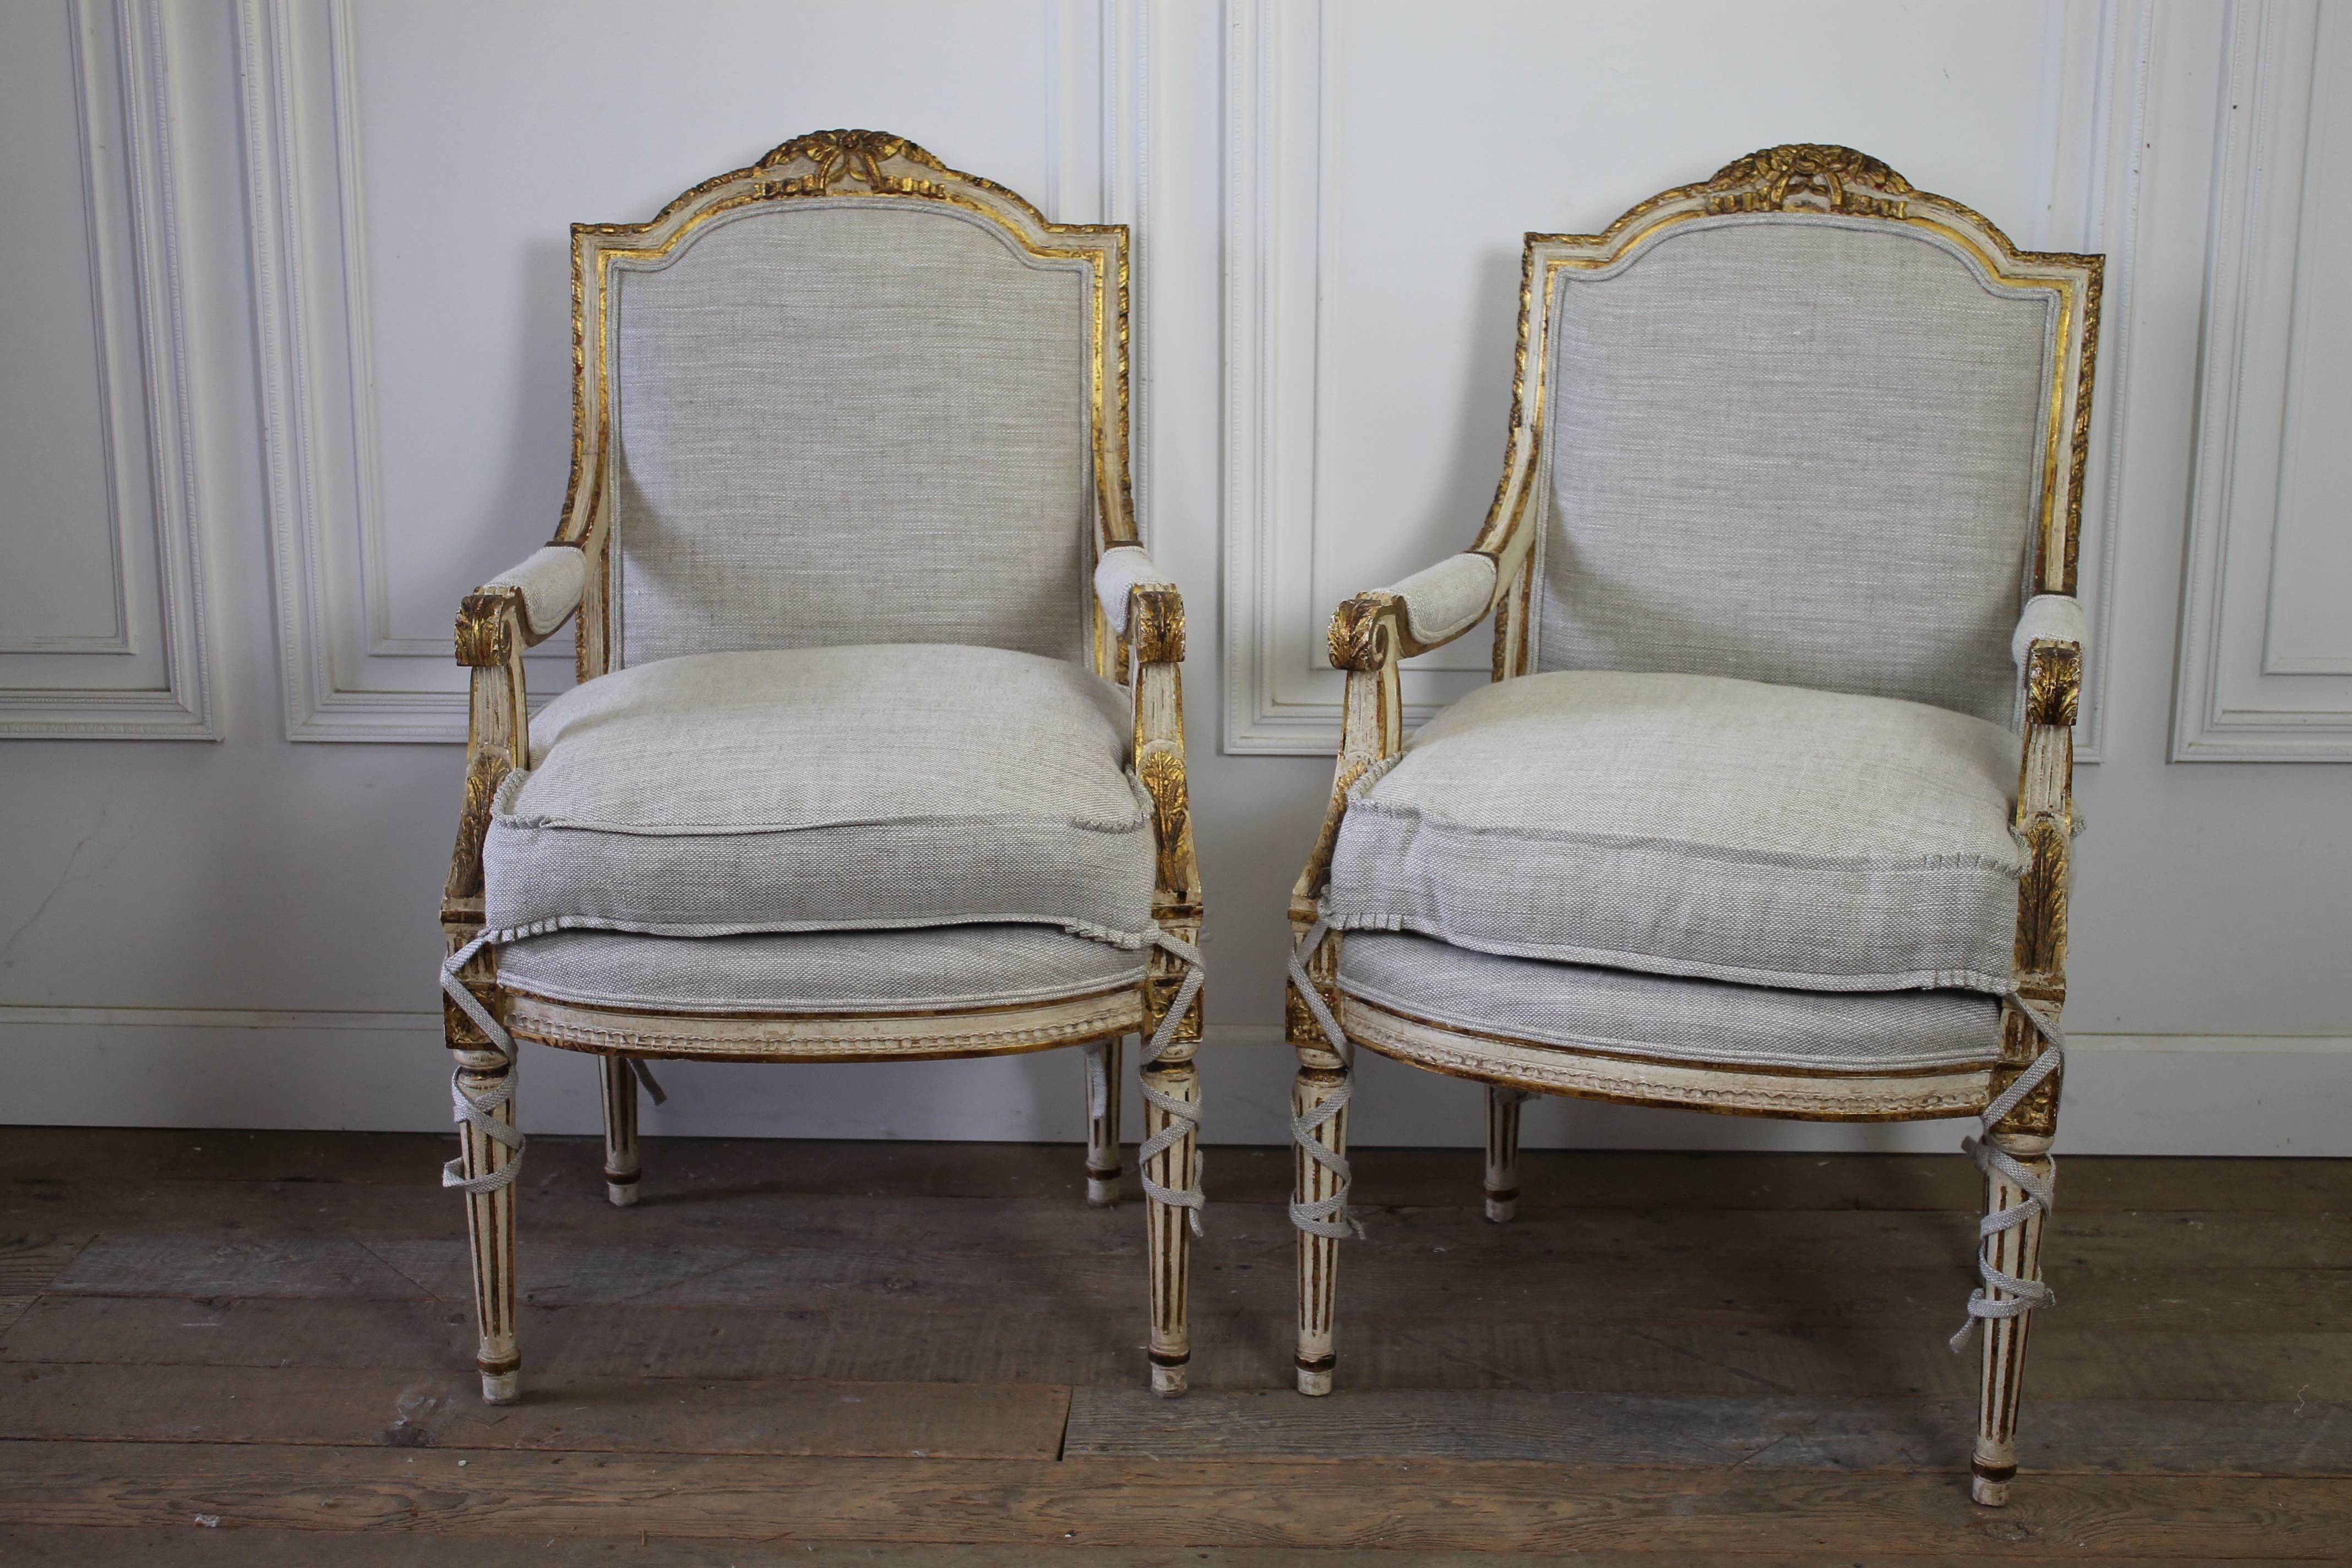 Pair of 20th Century Carved Painted and Gilt Upholstered Open Arm Chairs

We reupholstered these beautiful pair of painted and gilt chair in our 100% pure Irish linen, with its thick nubby burlap look, but soft linen feel. The linen color is a light